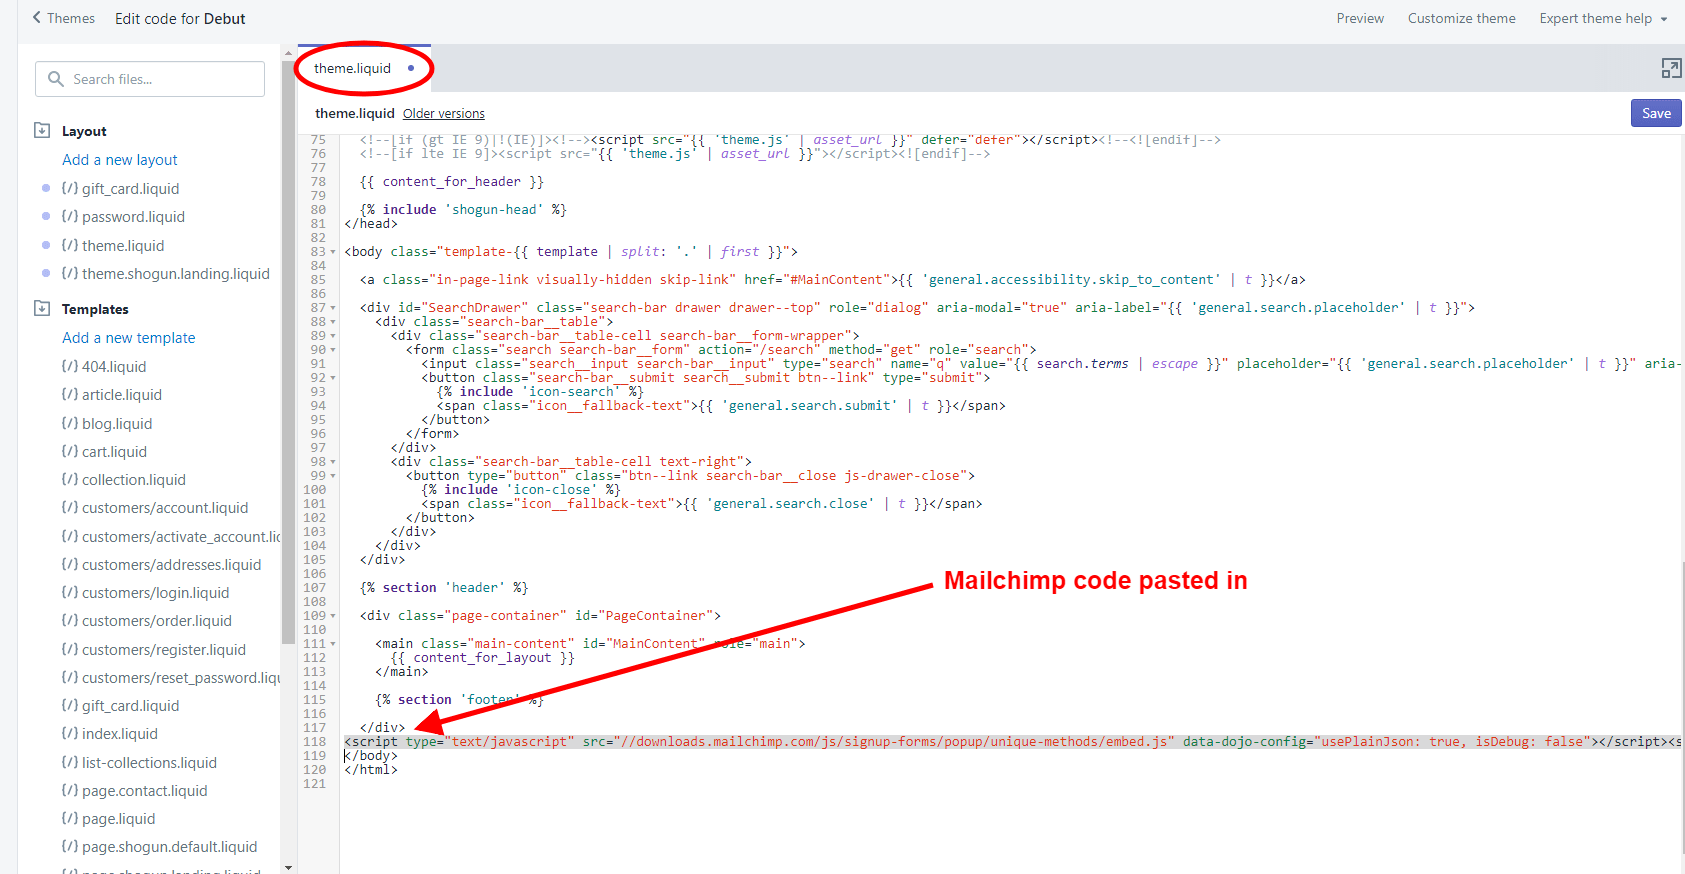 Scroll to the bottom of the code and you’ll paste in the Mailchimp popup code right before the </body> tag